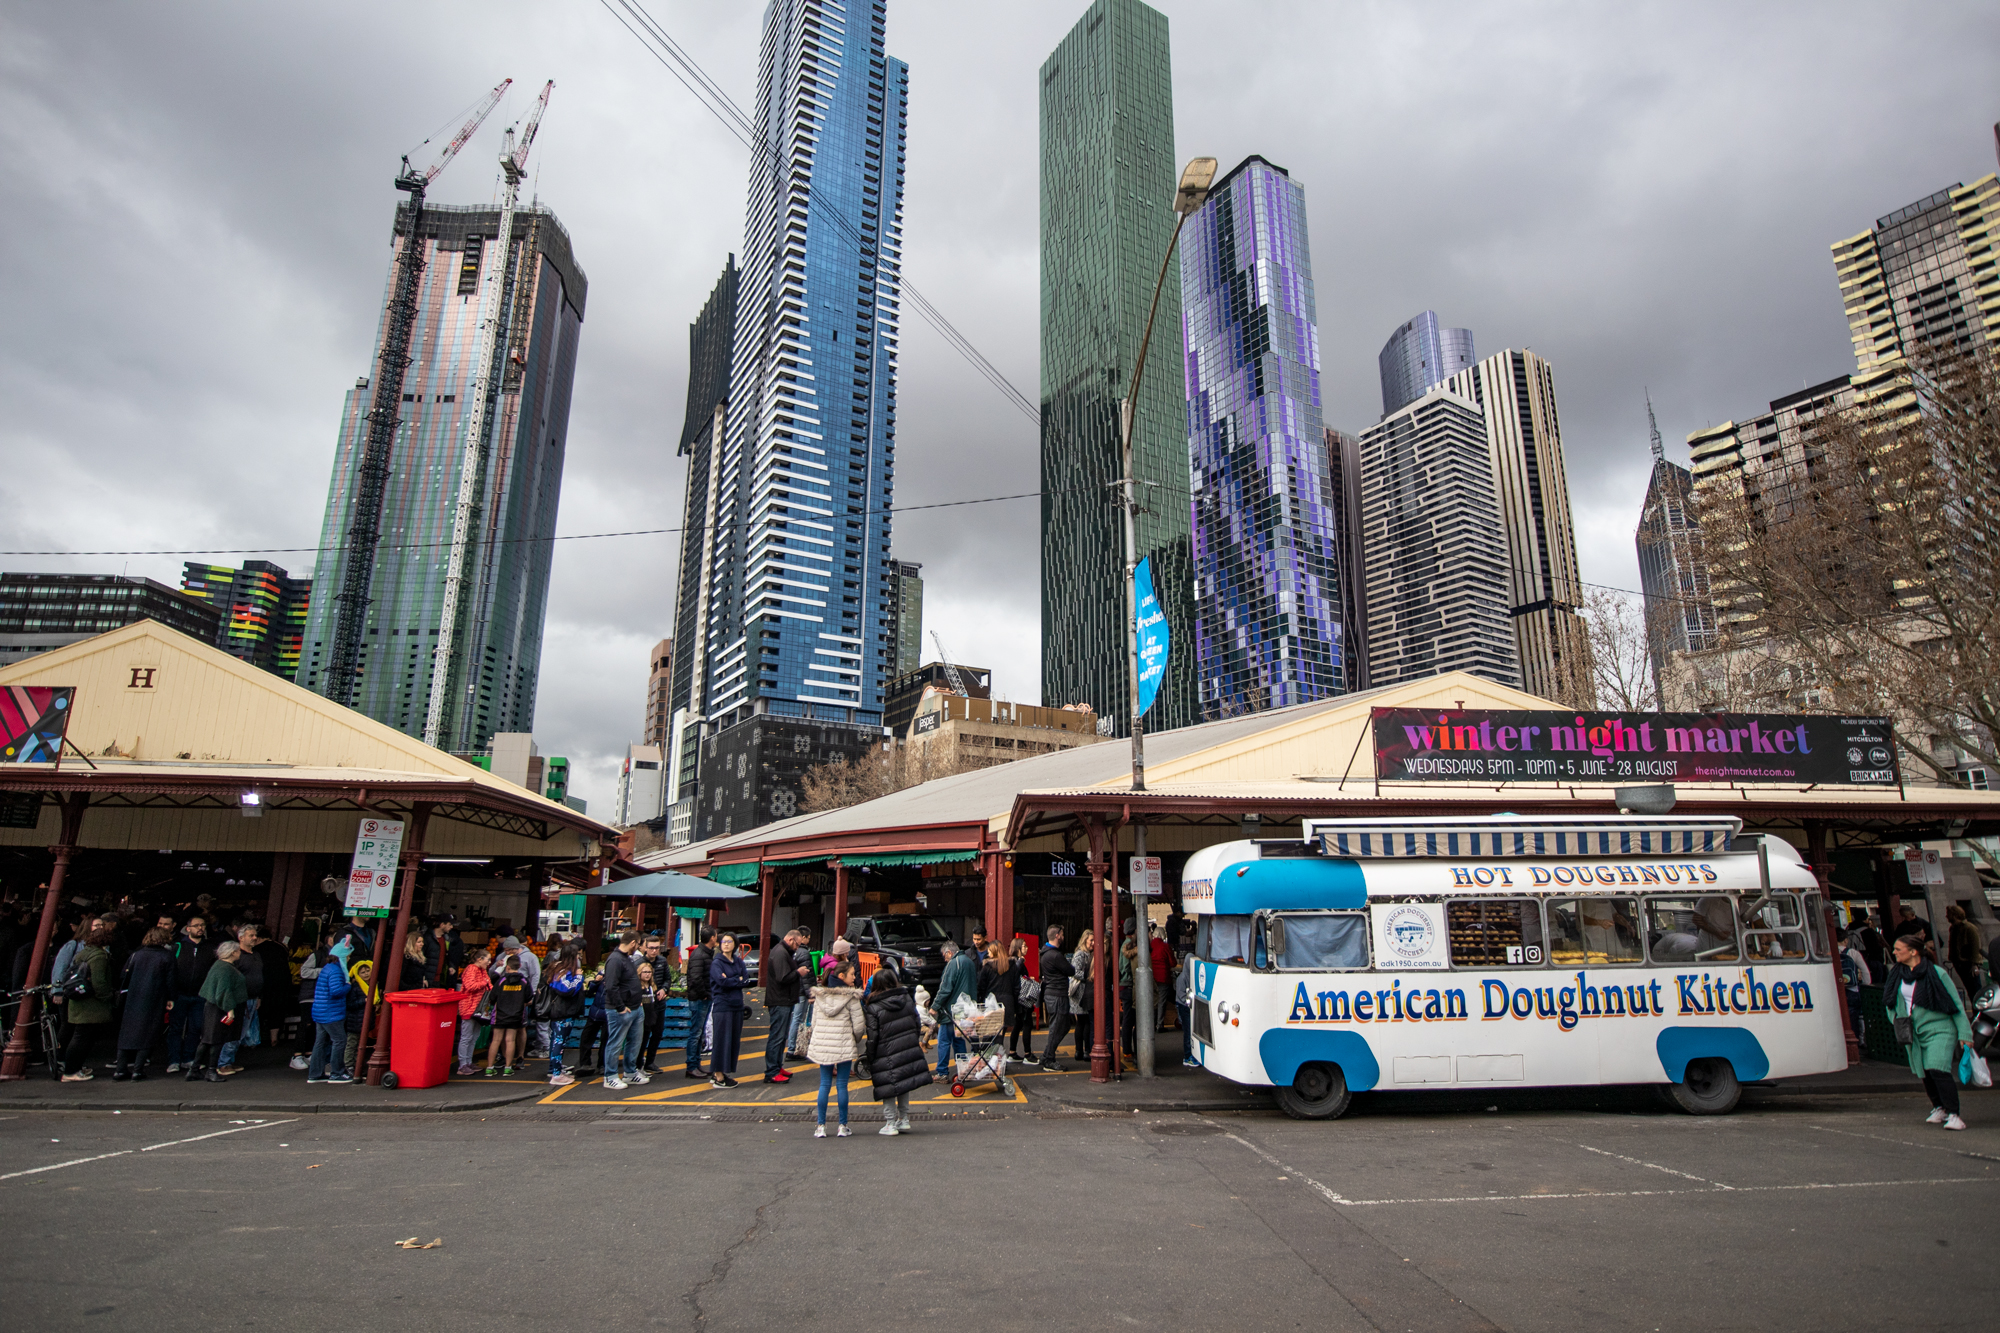 The American Doughnut Kitchen bus parks outside the Queen Victoria Market, beneath the Melbourne skyline